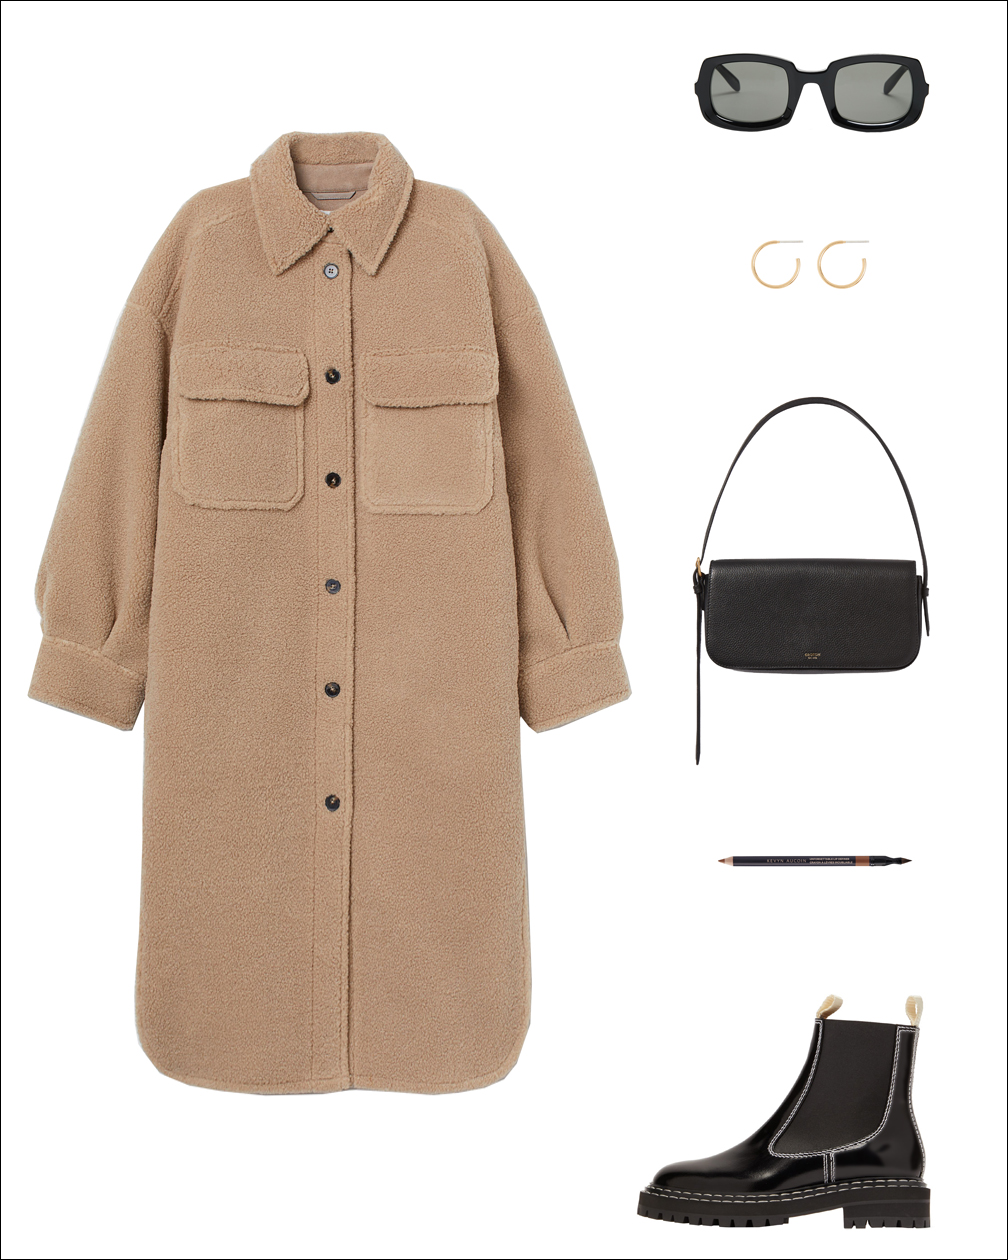 How to Wear a Long Shearling Shacket for Fall